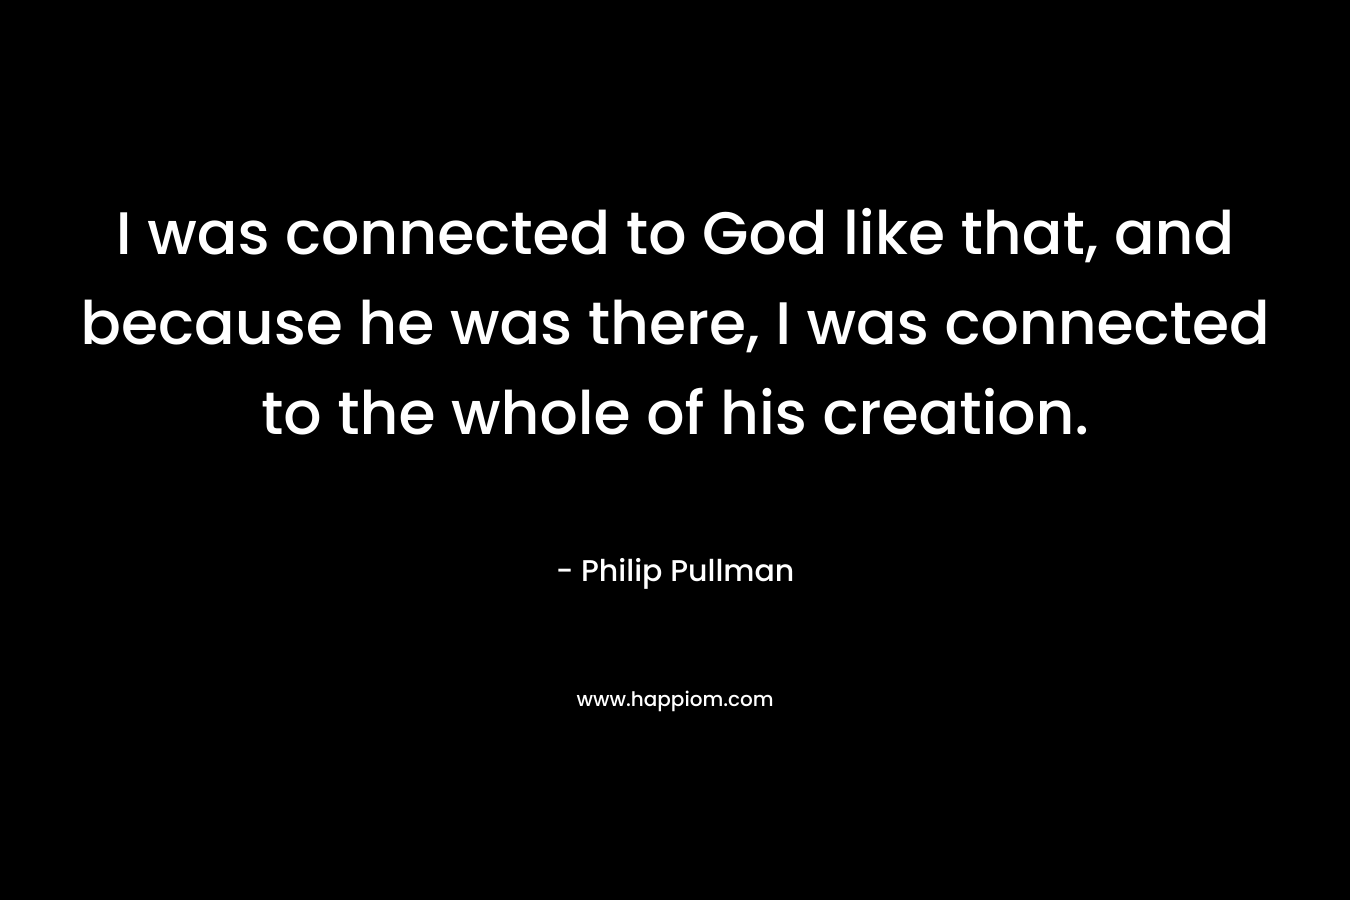 I was connected to God like that, and because he was there, I was connected to the whole of his creation.